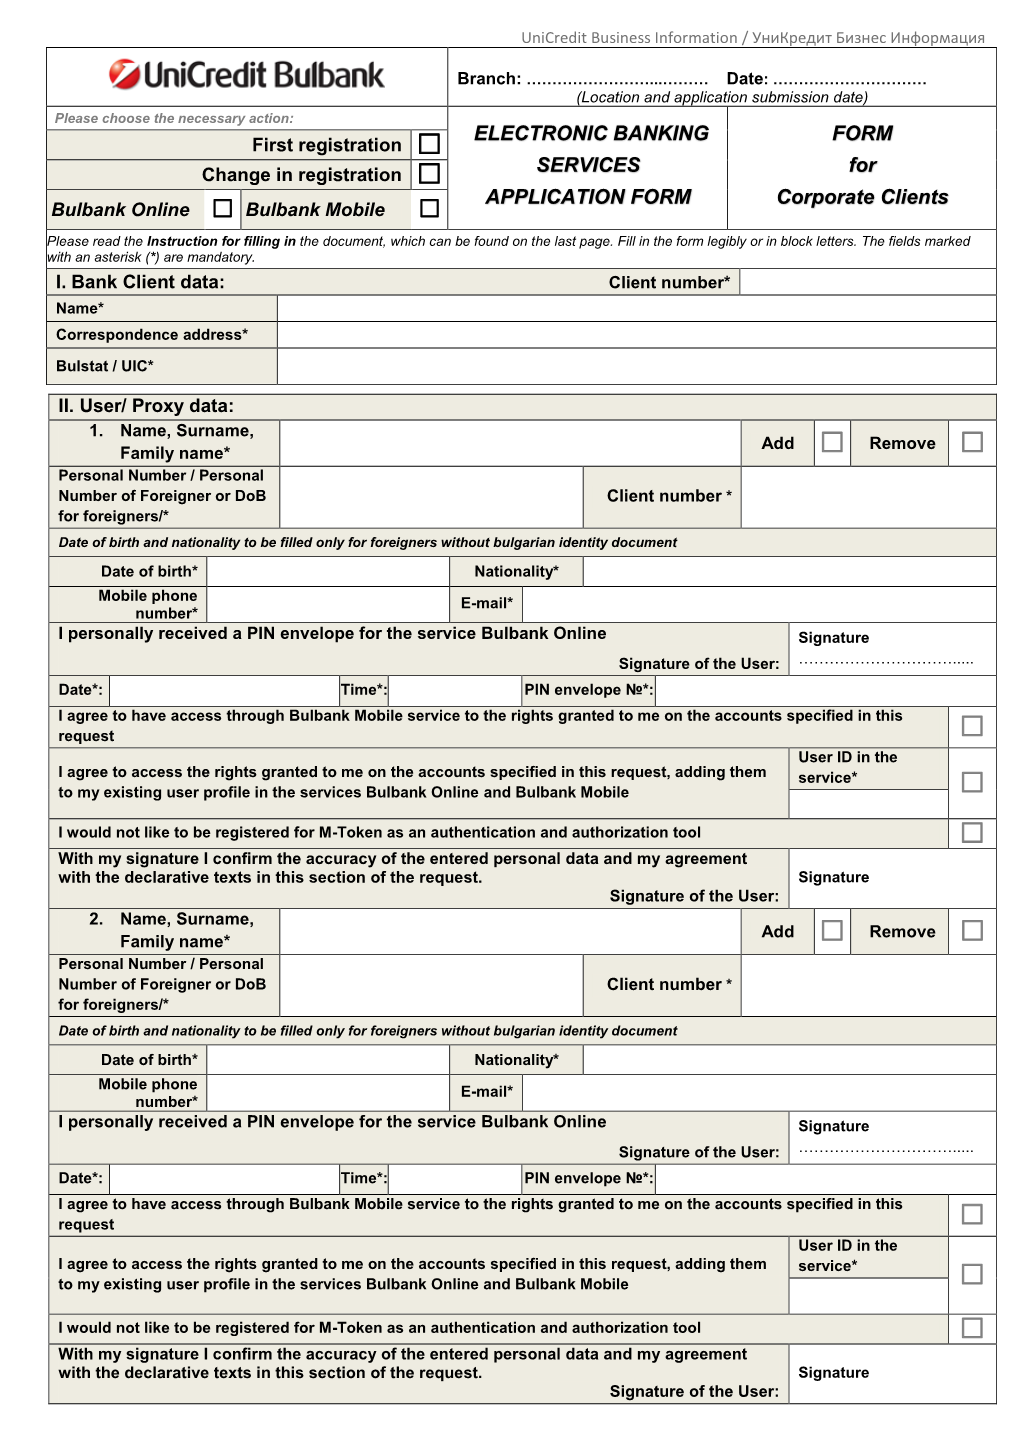 Electronic Banking Services Application Form for Corporate